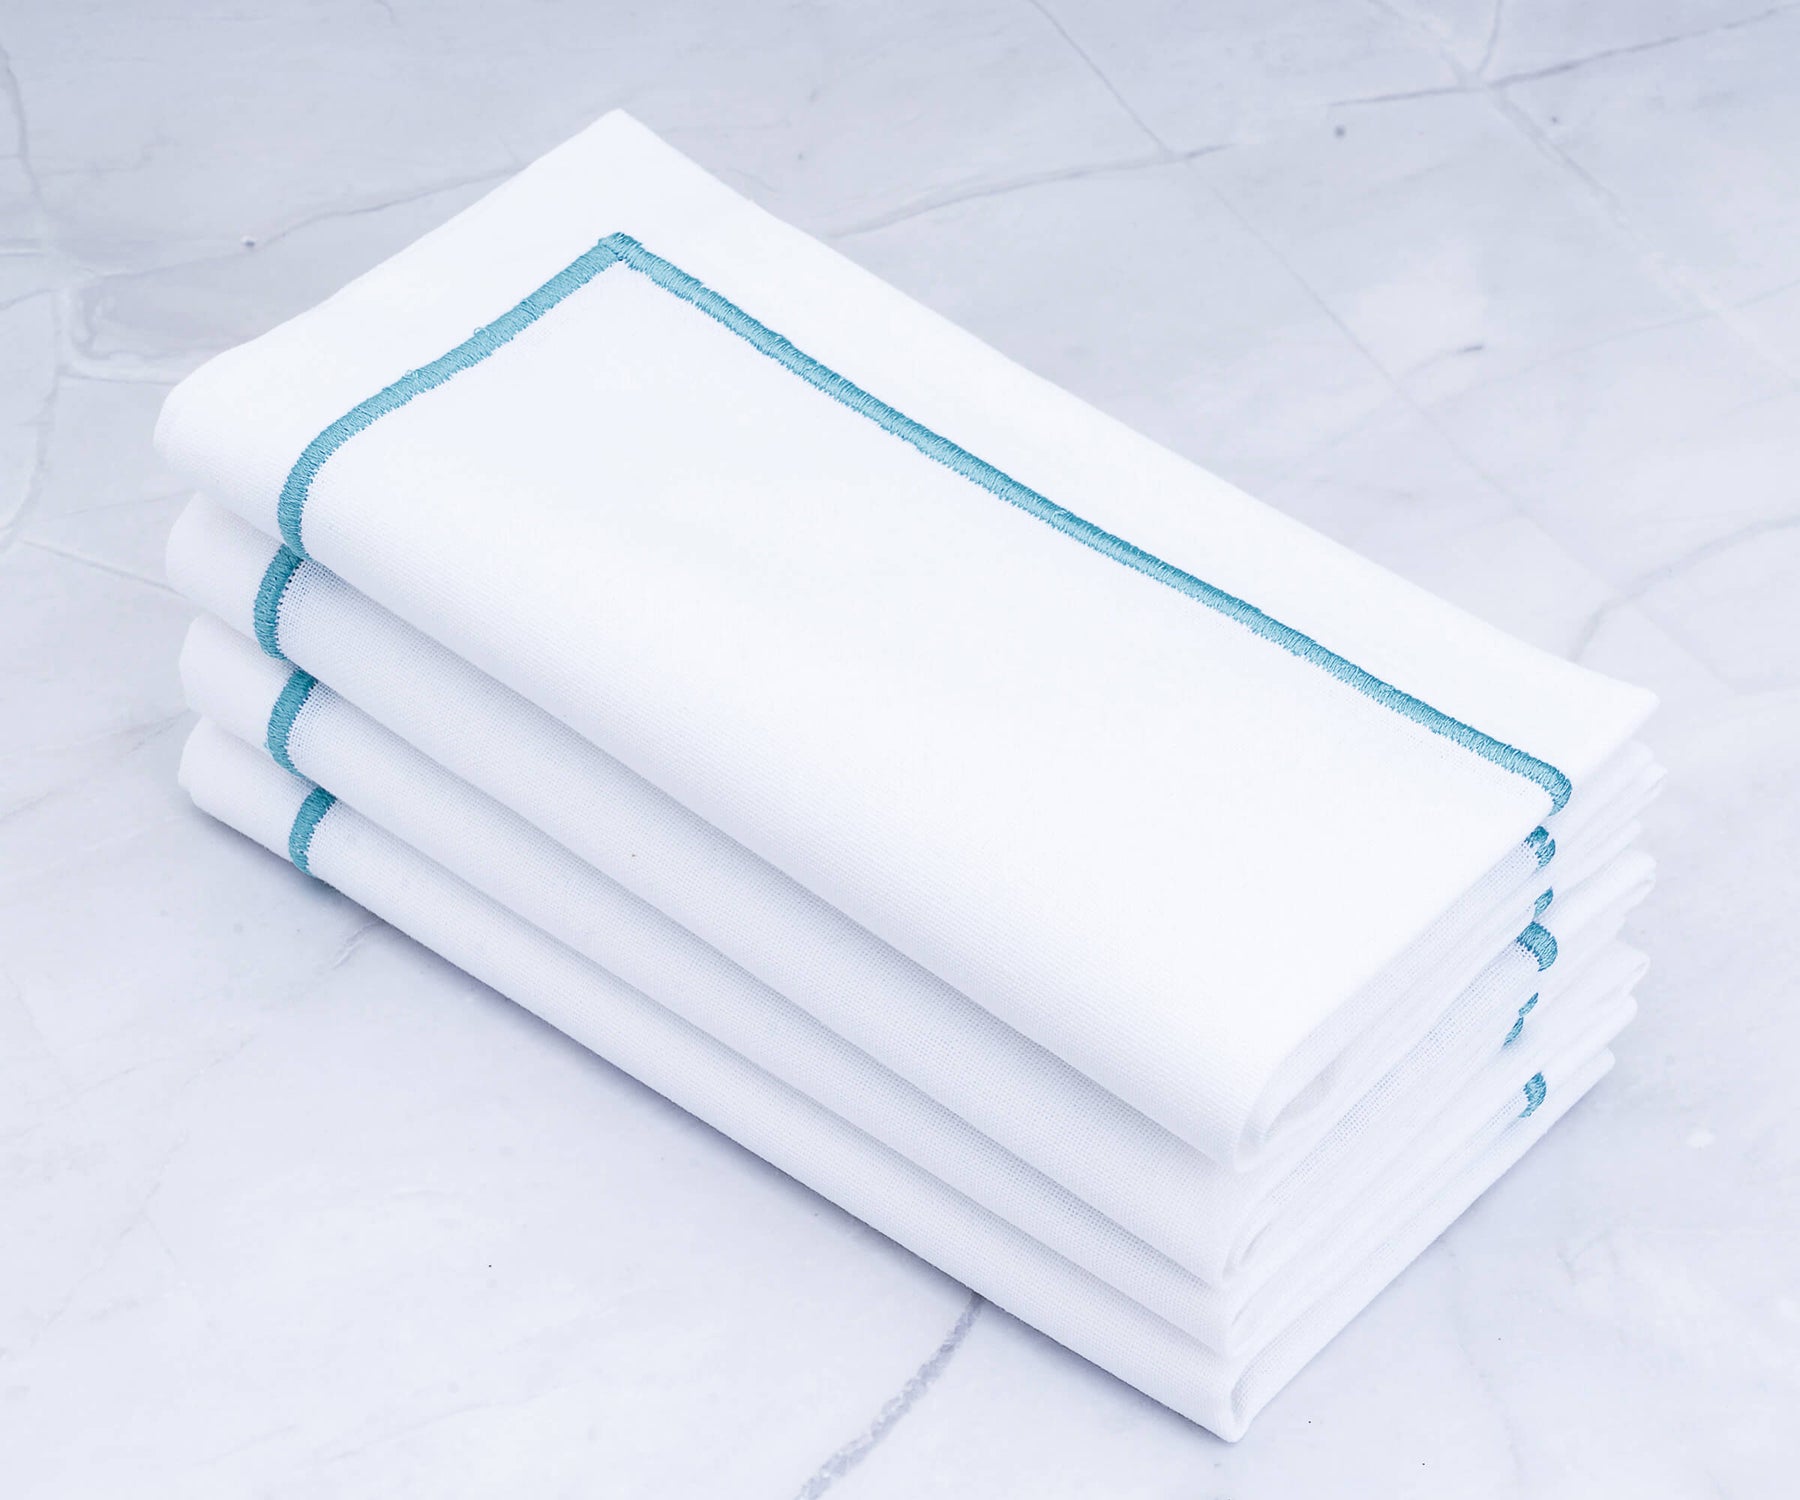 Set of four white dinner napkins with blue trim on a marble countertop